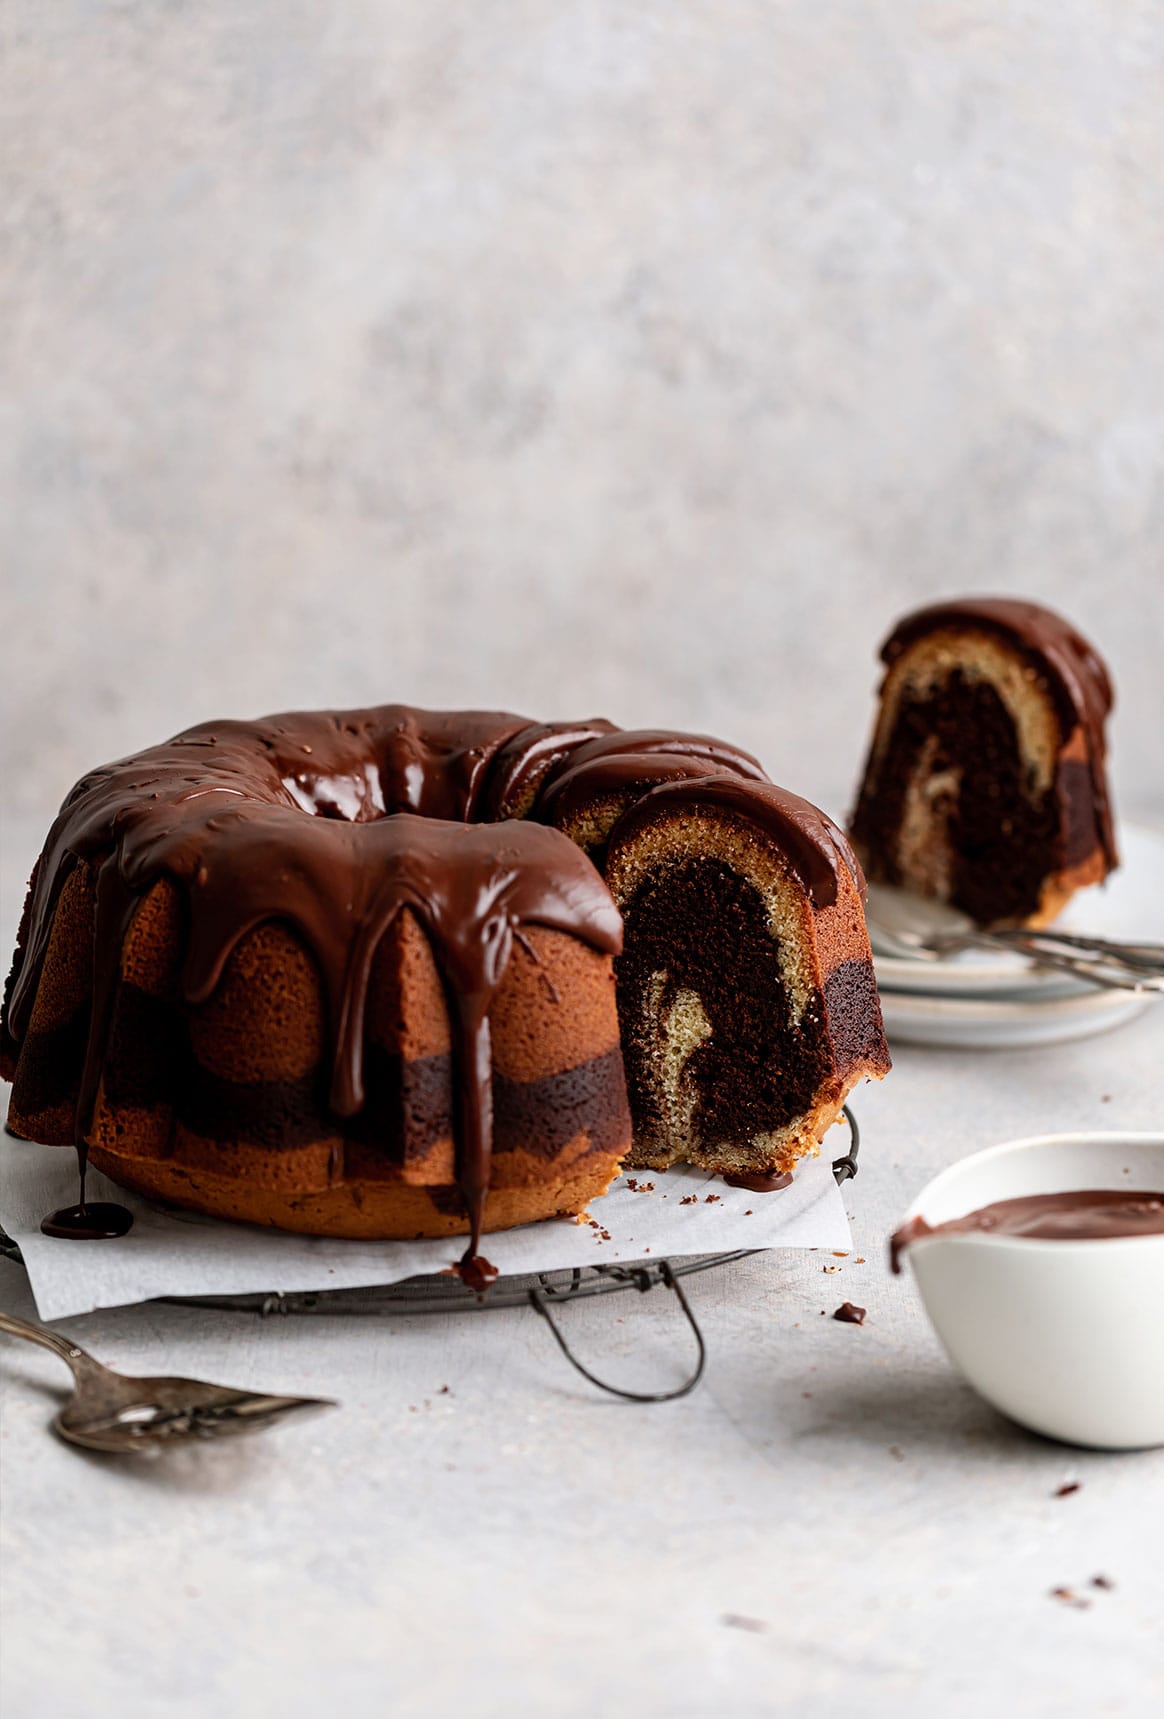 Homemade Marble Cake (+ Chocolate Frosting) - Live Well Bake Often